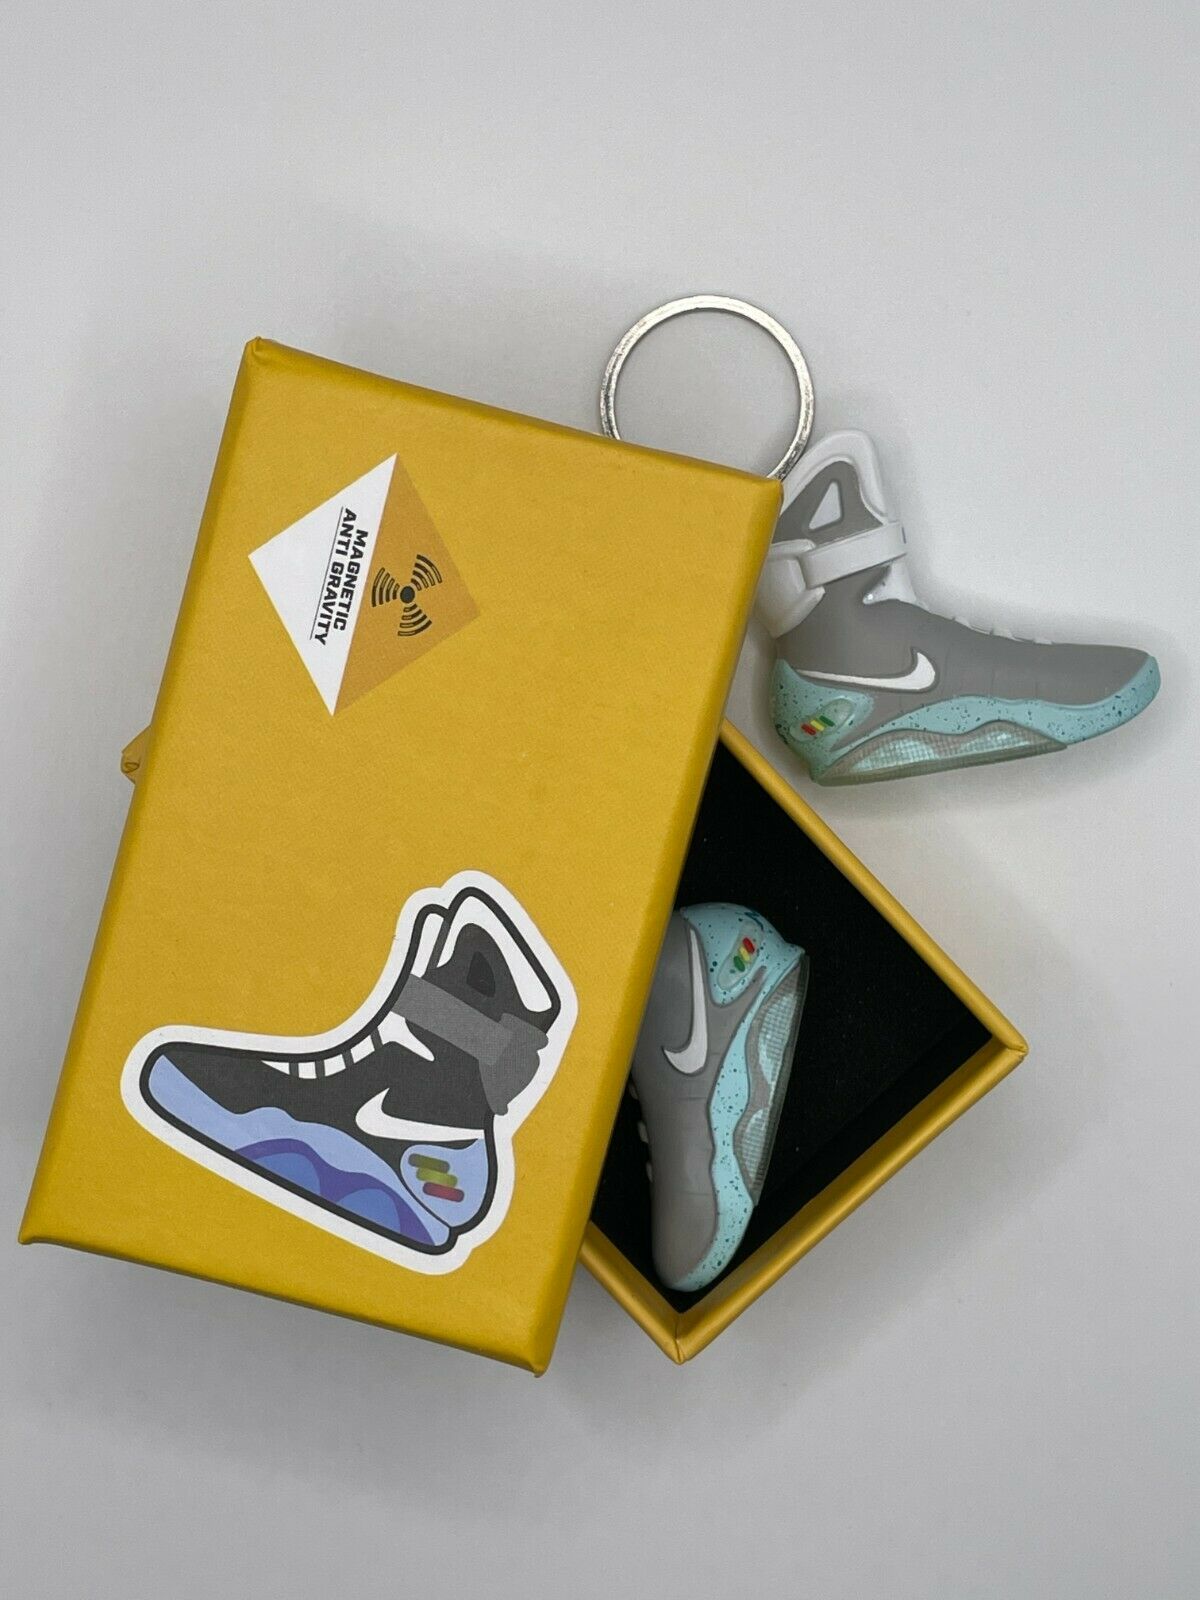 New Mini 3D Air MAG Nike sneaker shoes keychain Hand-painted "BacktoFuture"